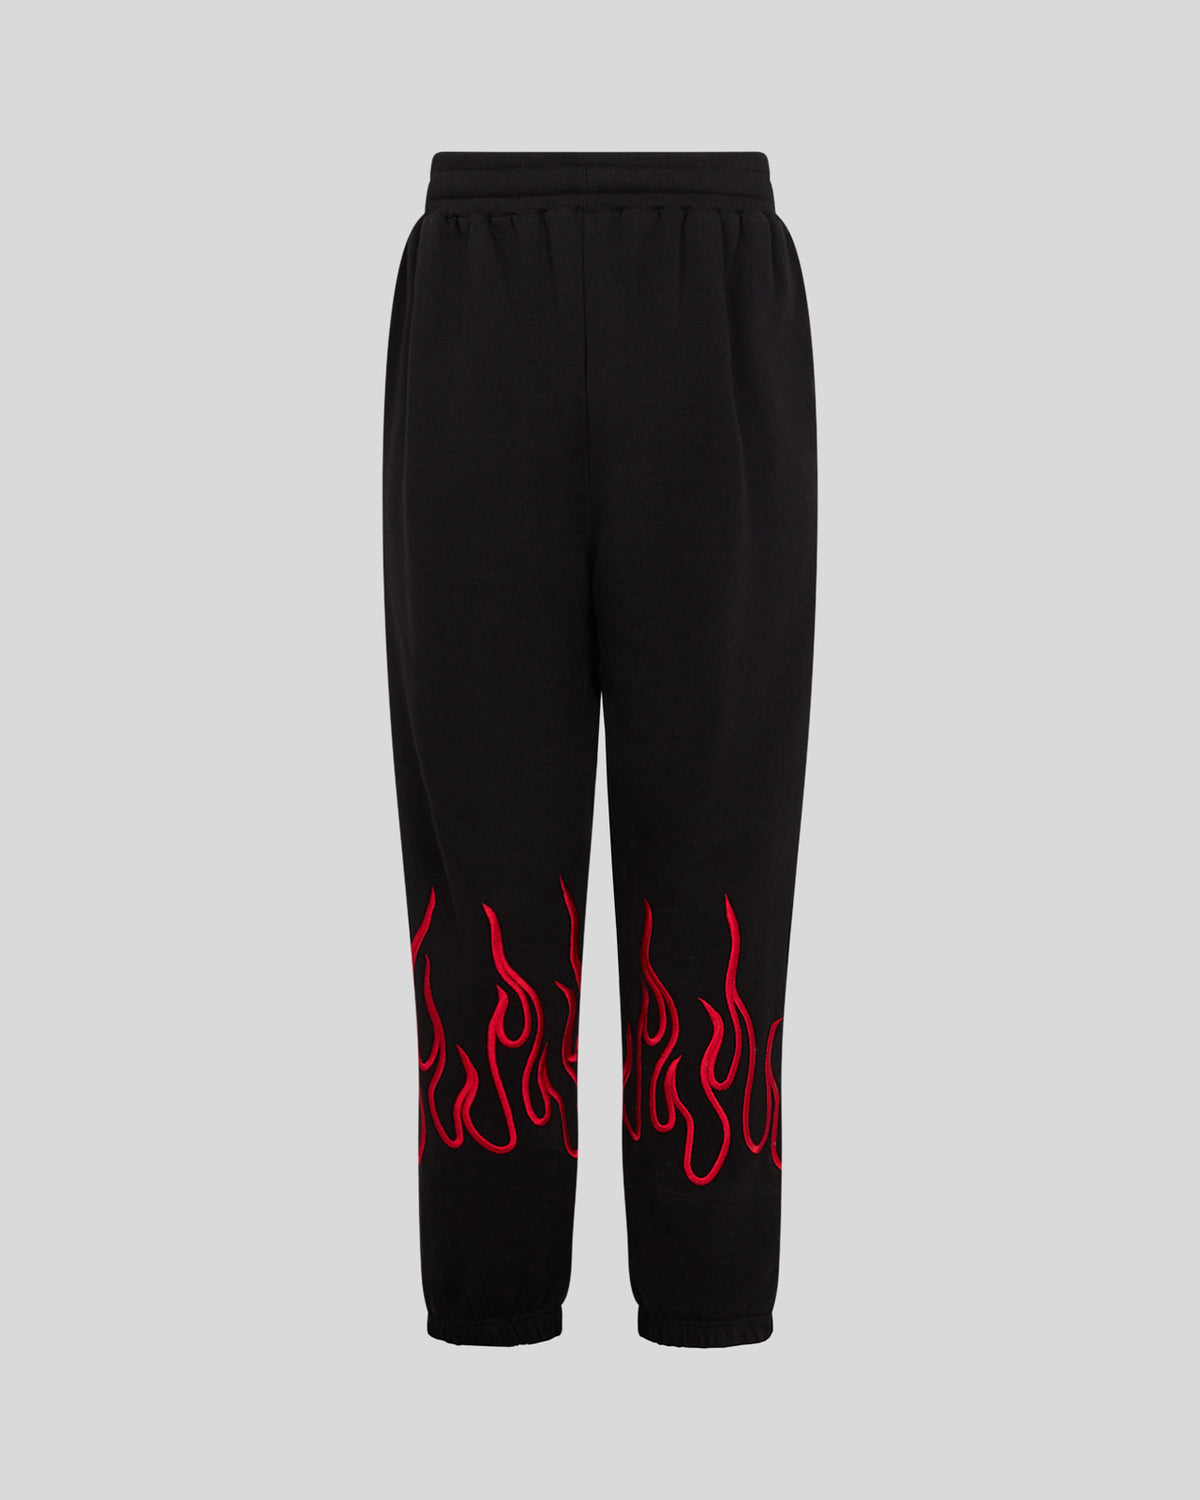 VISION OF SUPER BLACK PANTS WITH RED EMBROIDERED FLAMES